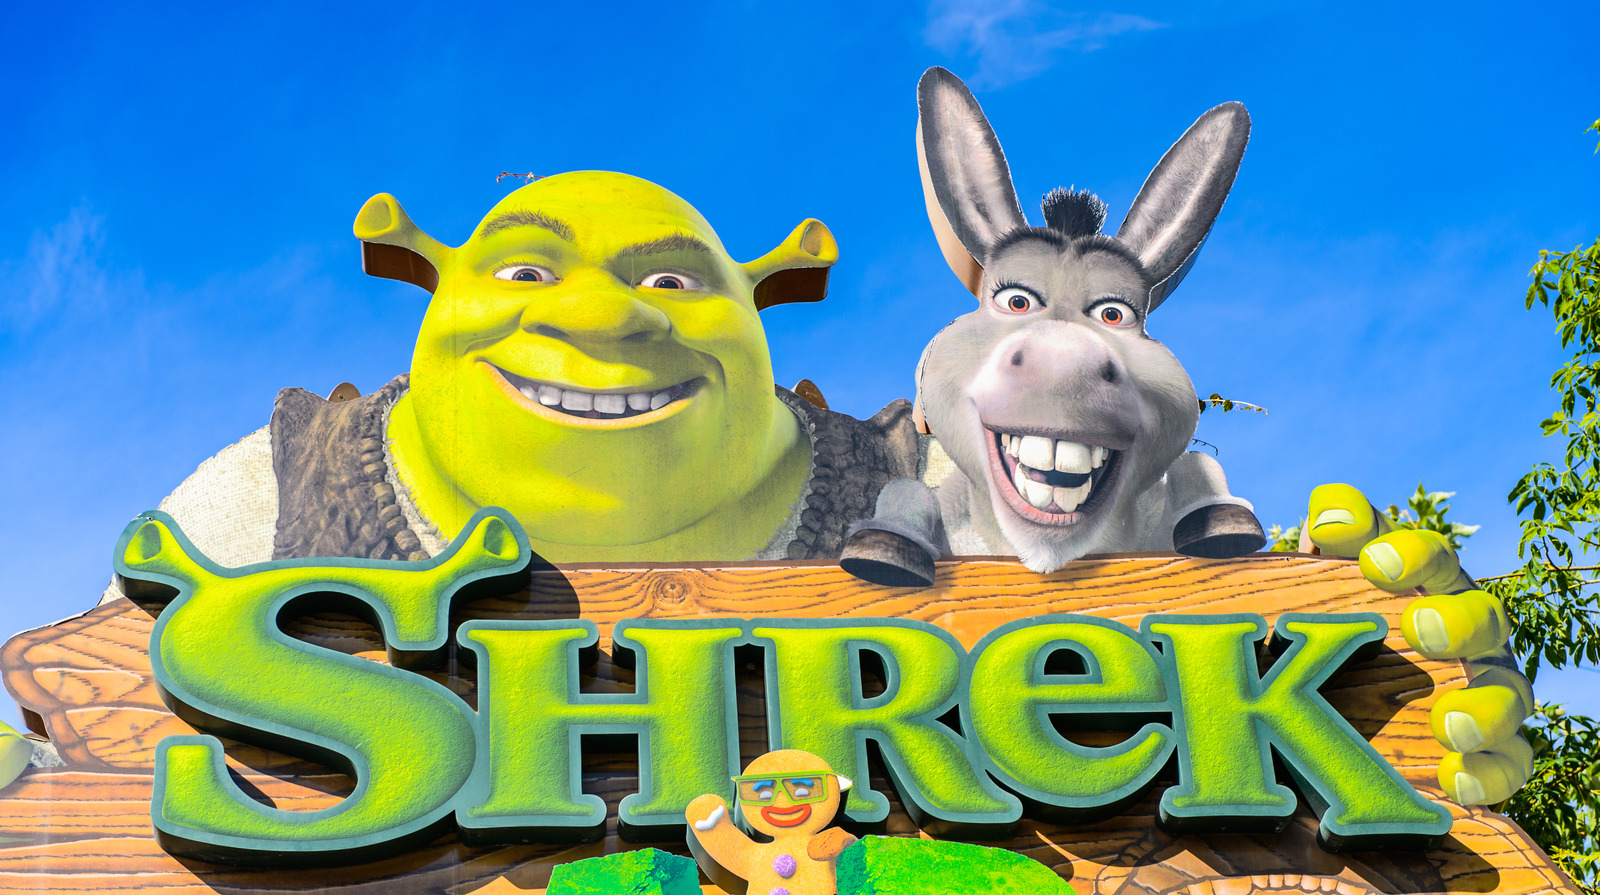 https://www.thedailymeal.com/img/gallery/shrek-inspired-foods-you-might-have-forgotten-about/l-intro-1667243916.jpg